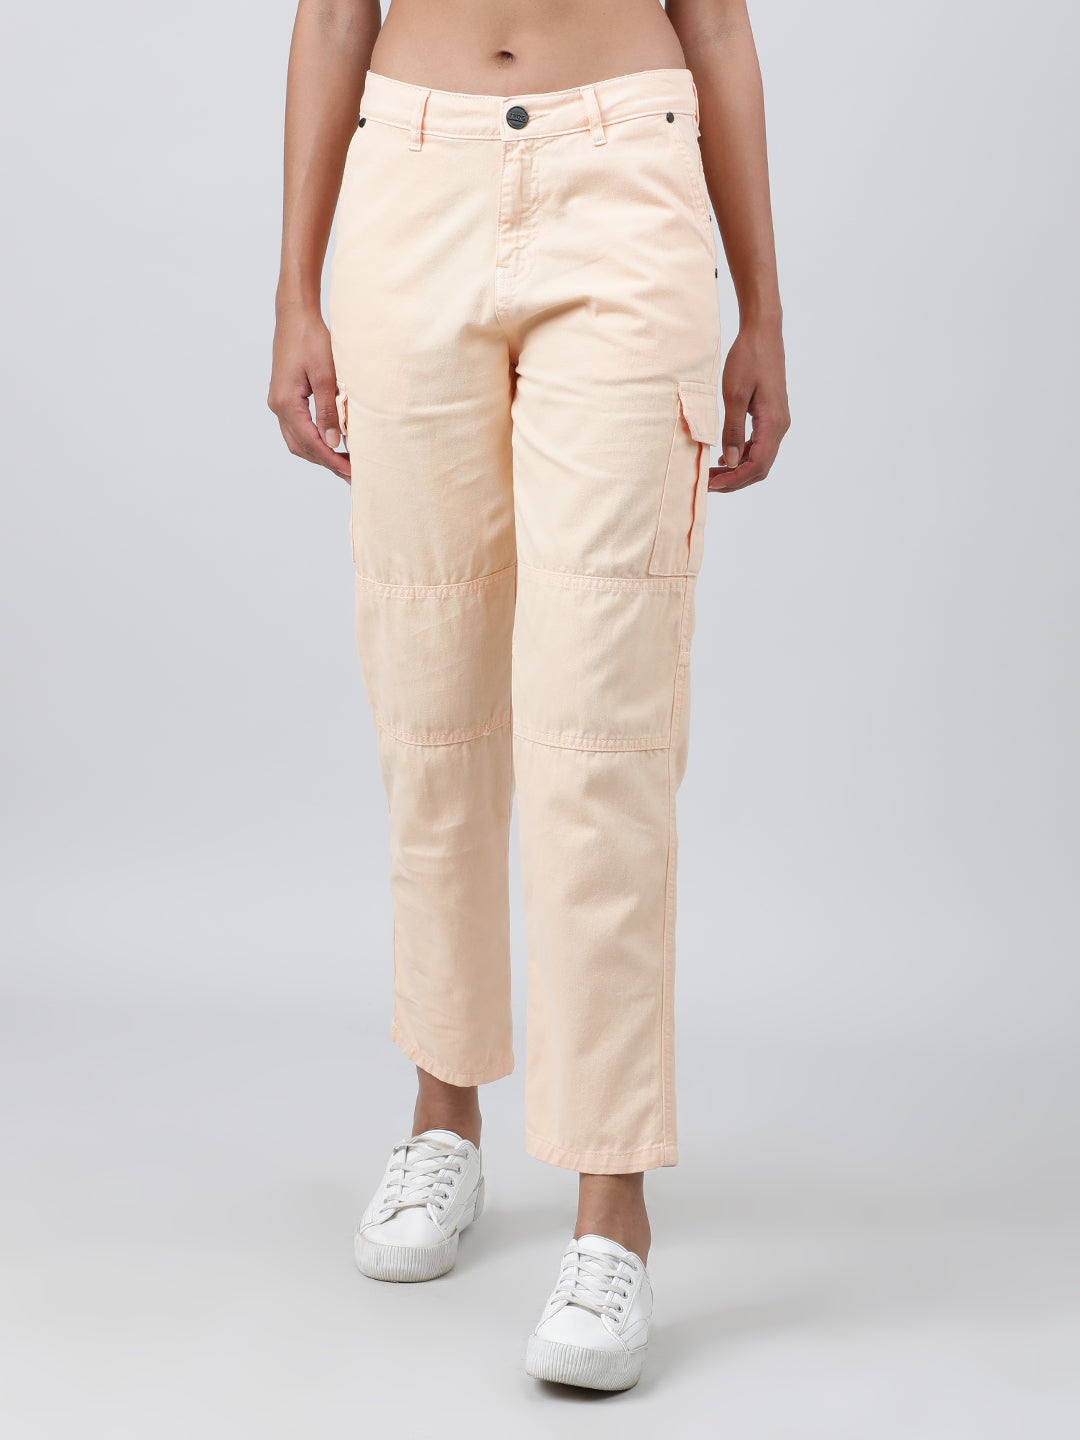 The North Face Womens 10 Straight Cut Cargo Pants Beige | eBay